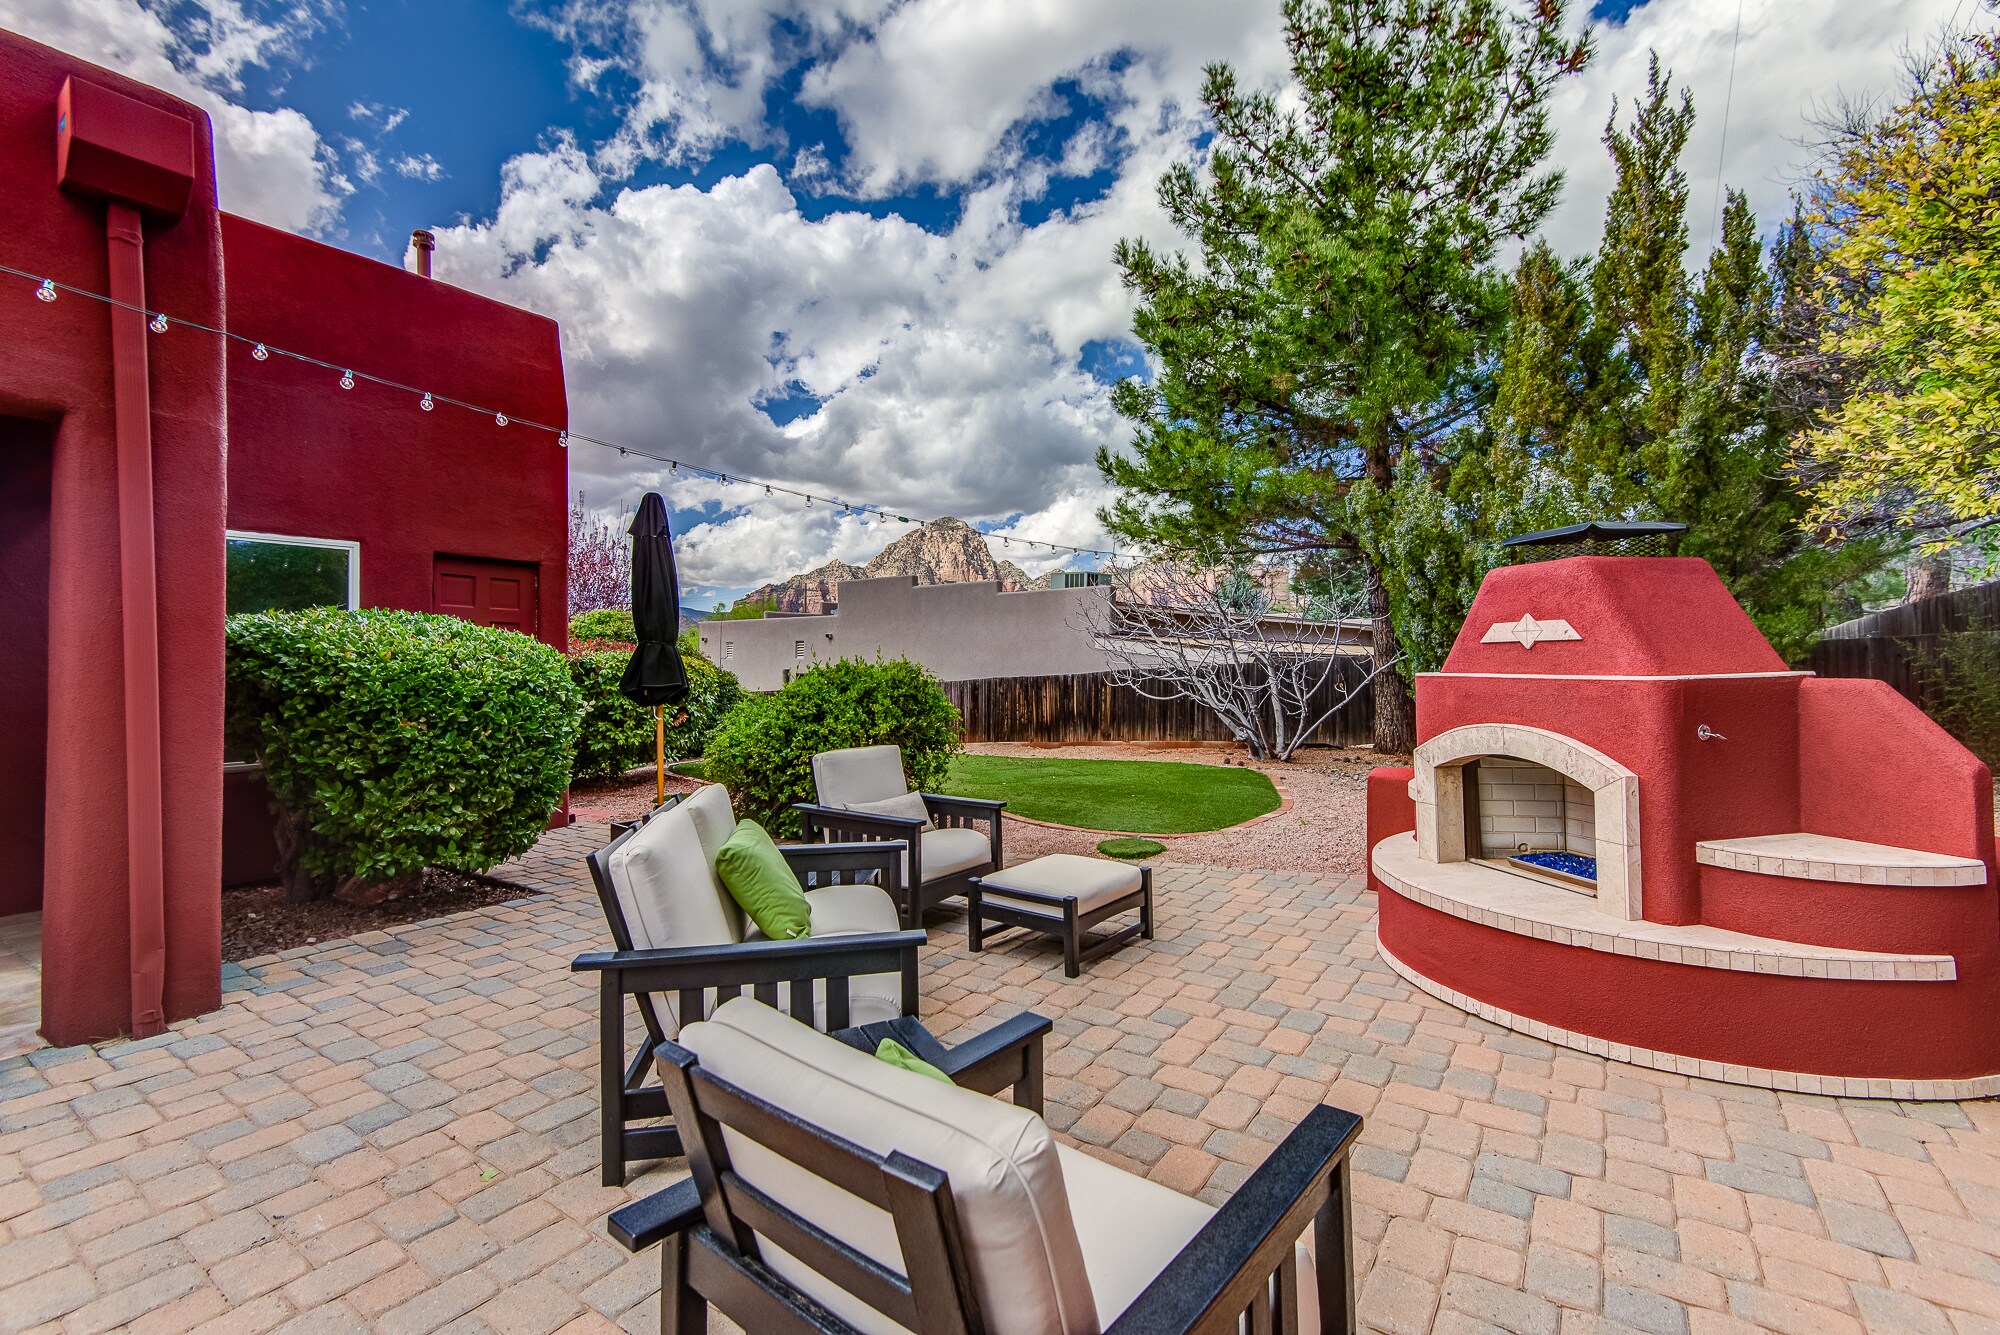 New Outdoor Gas Fireplace and Seating Area with Red Rock Views